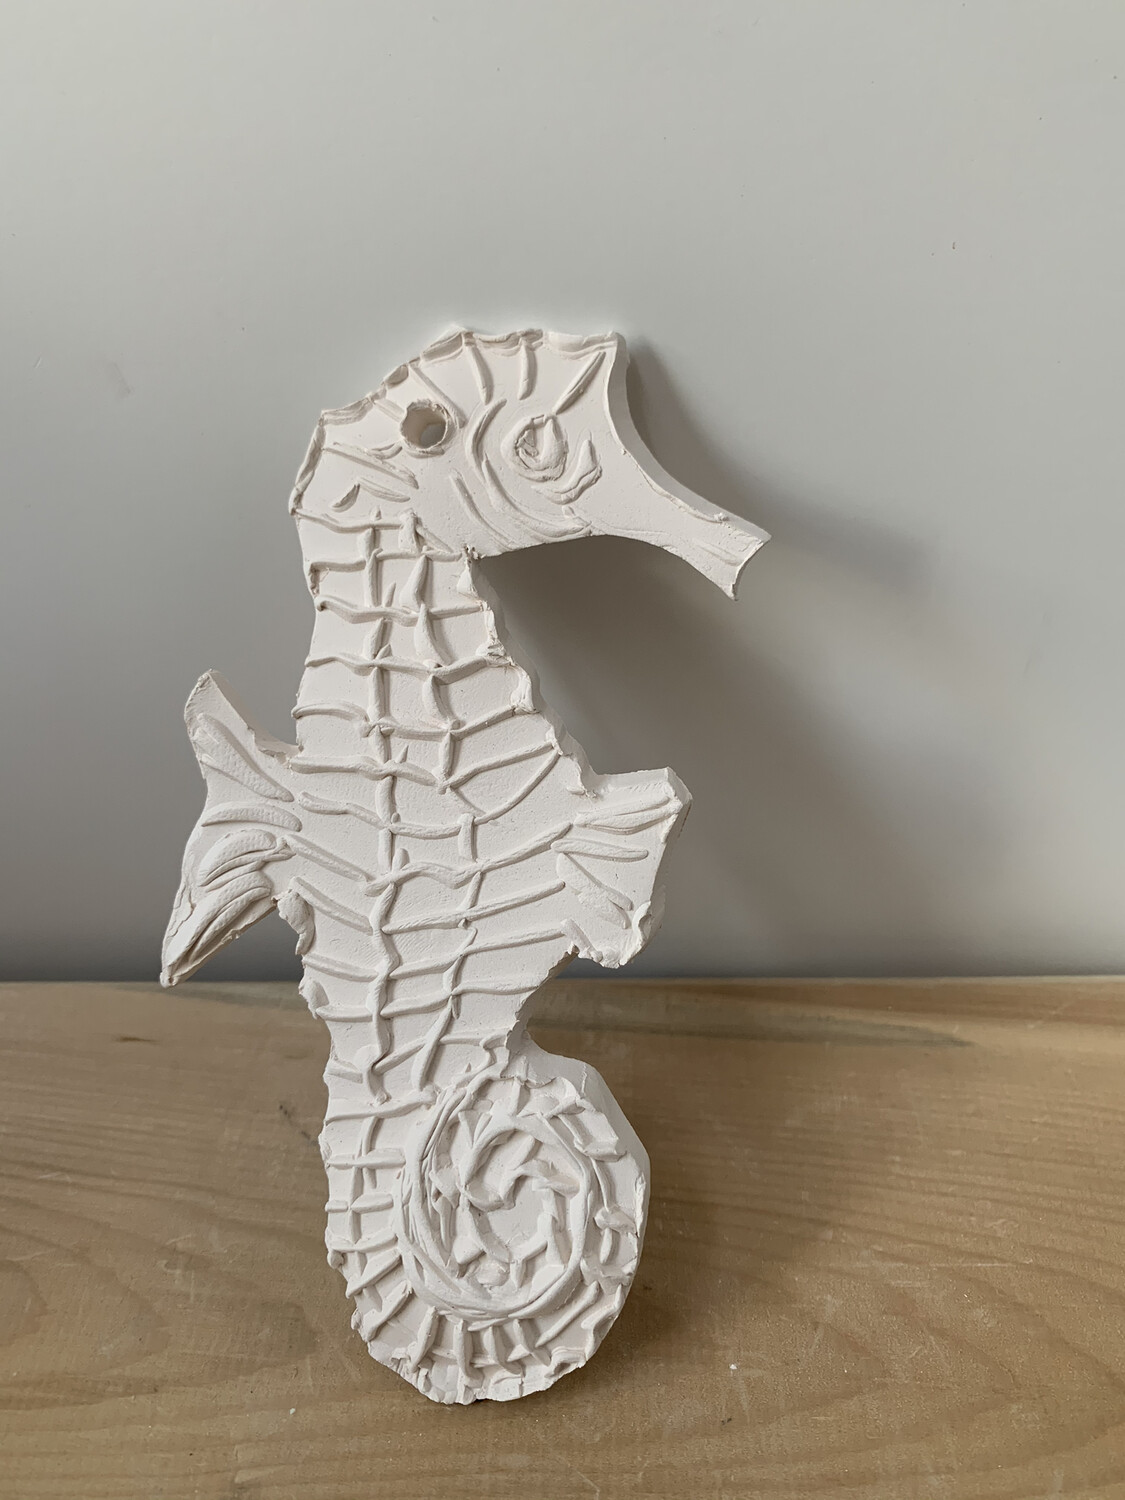 Paint Your Own Pottery - Ceramic
Seahorse Painting Kit